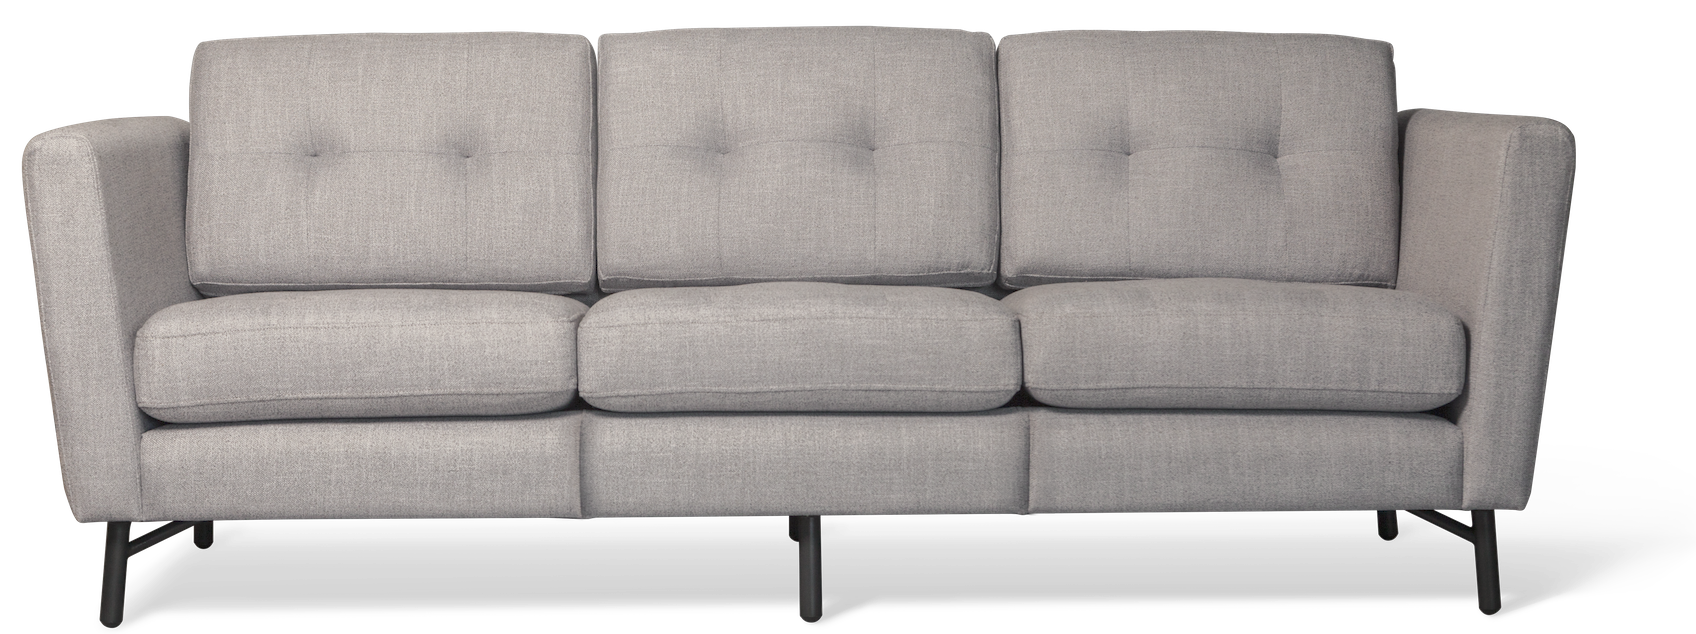 Download Couch Download Free Image HQ PNG Image | FreePNGImg